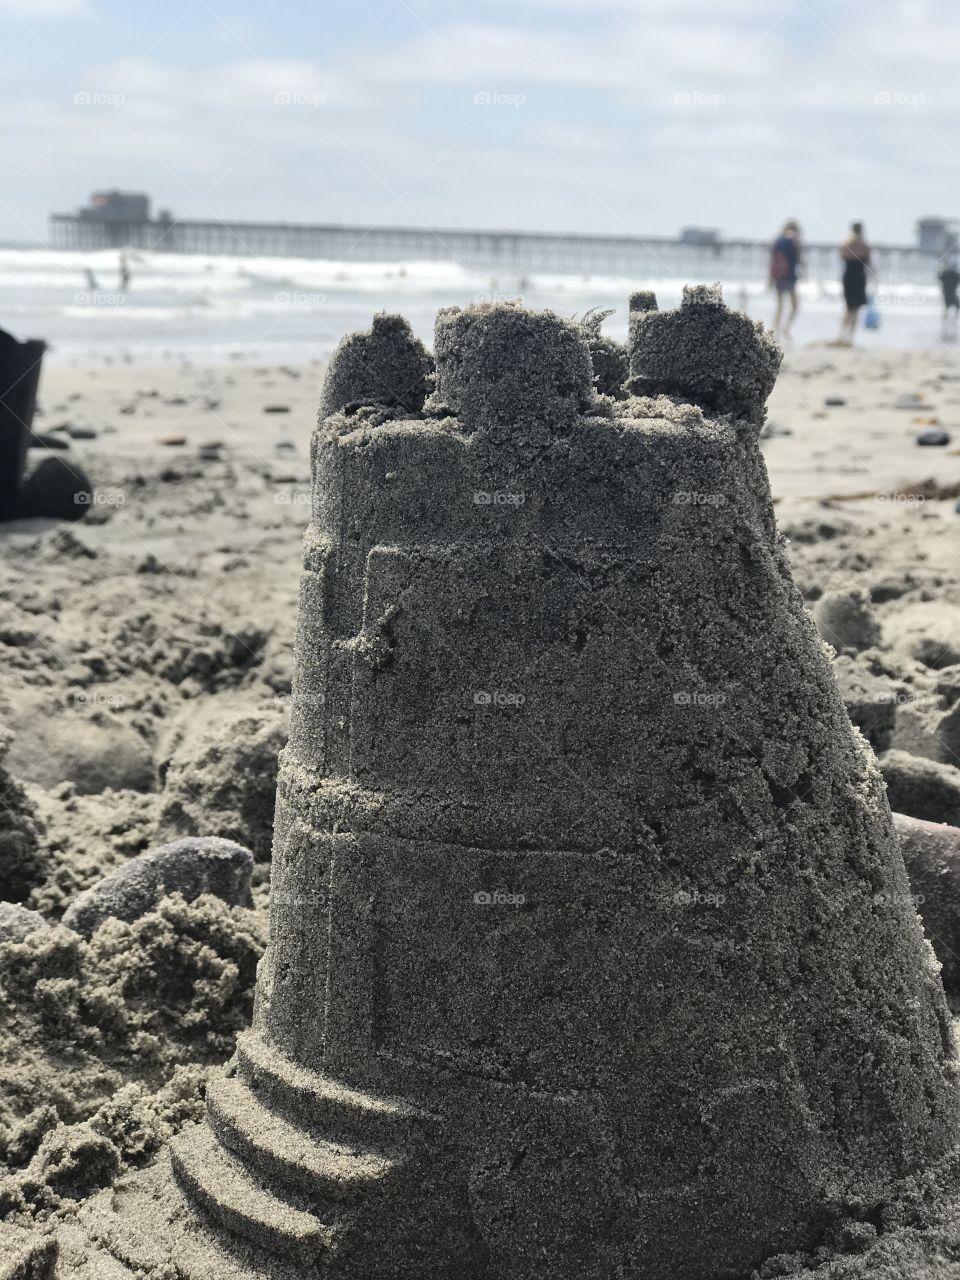 Crumbling sand castle